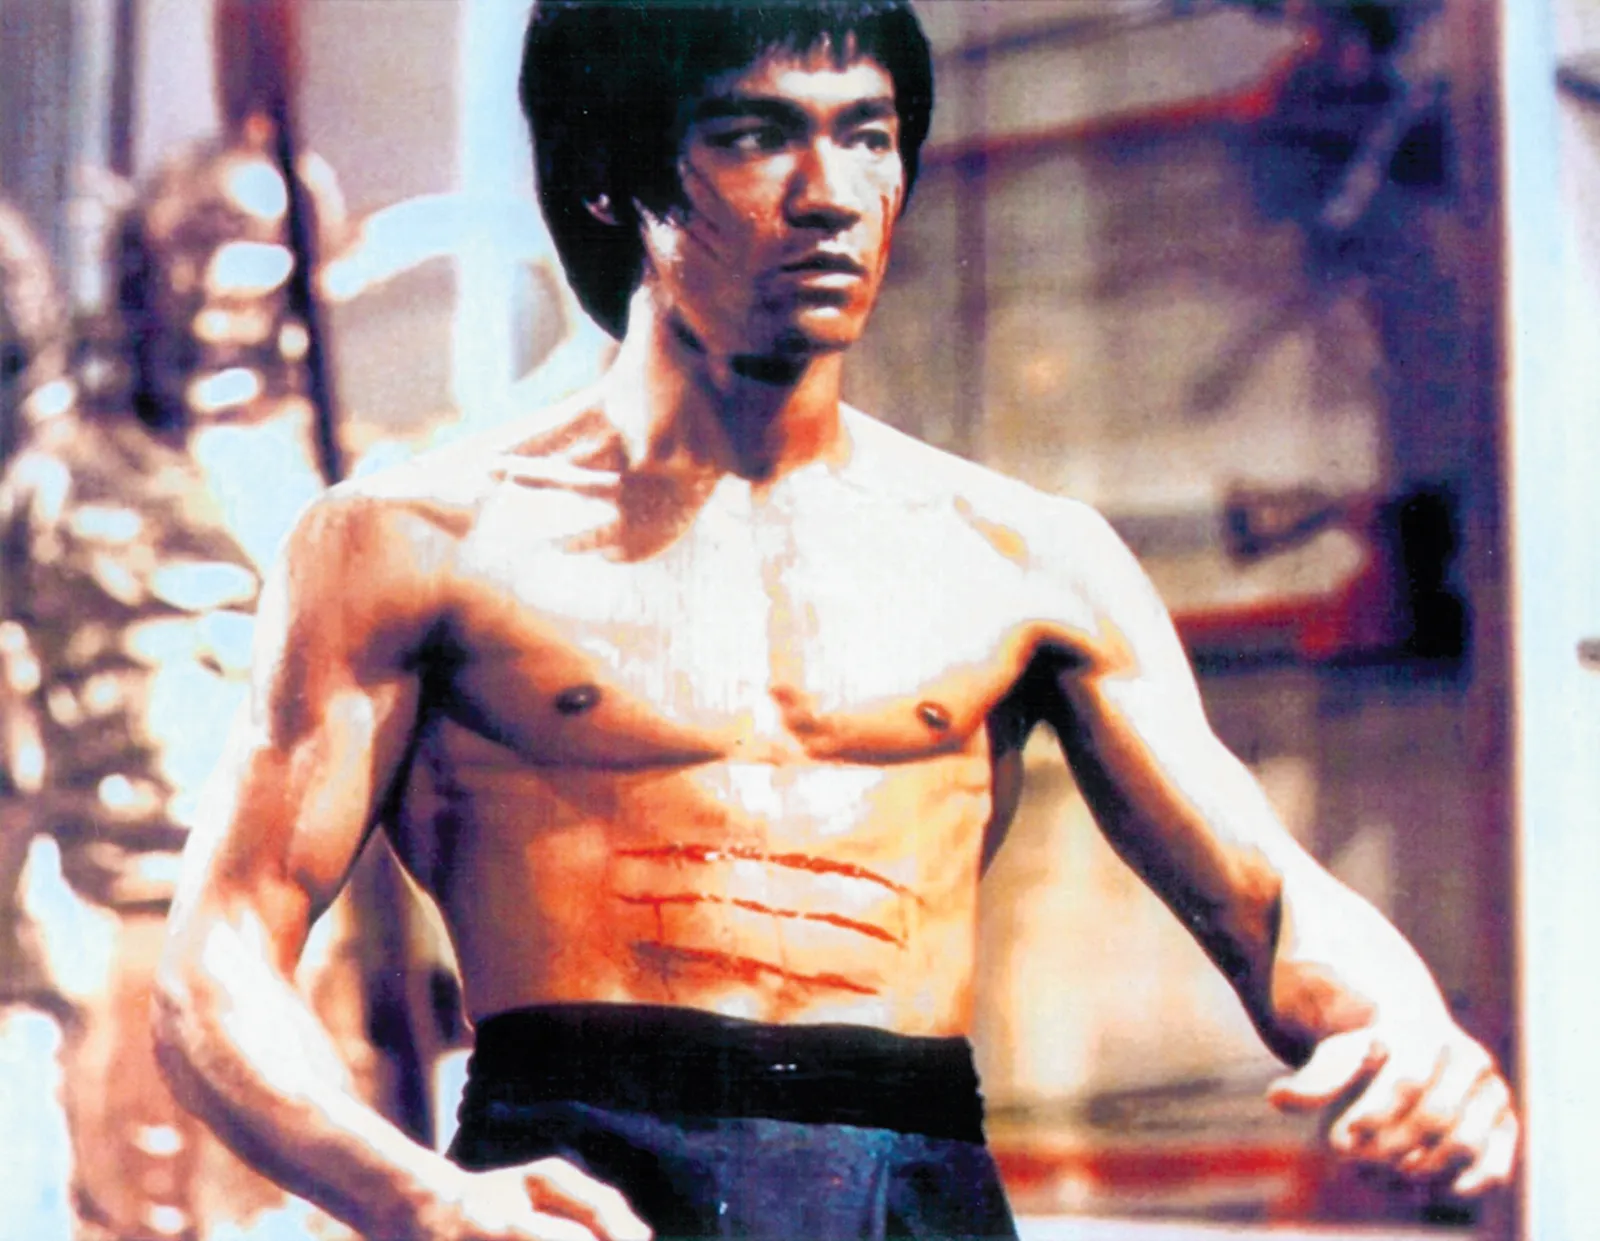 Bruce Lee from “Enter The Dragon.”